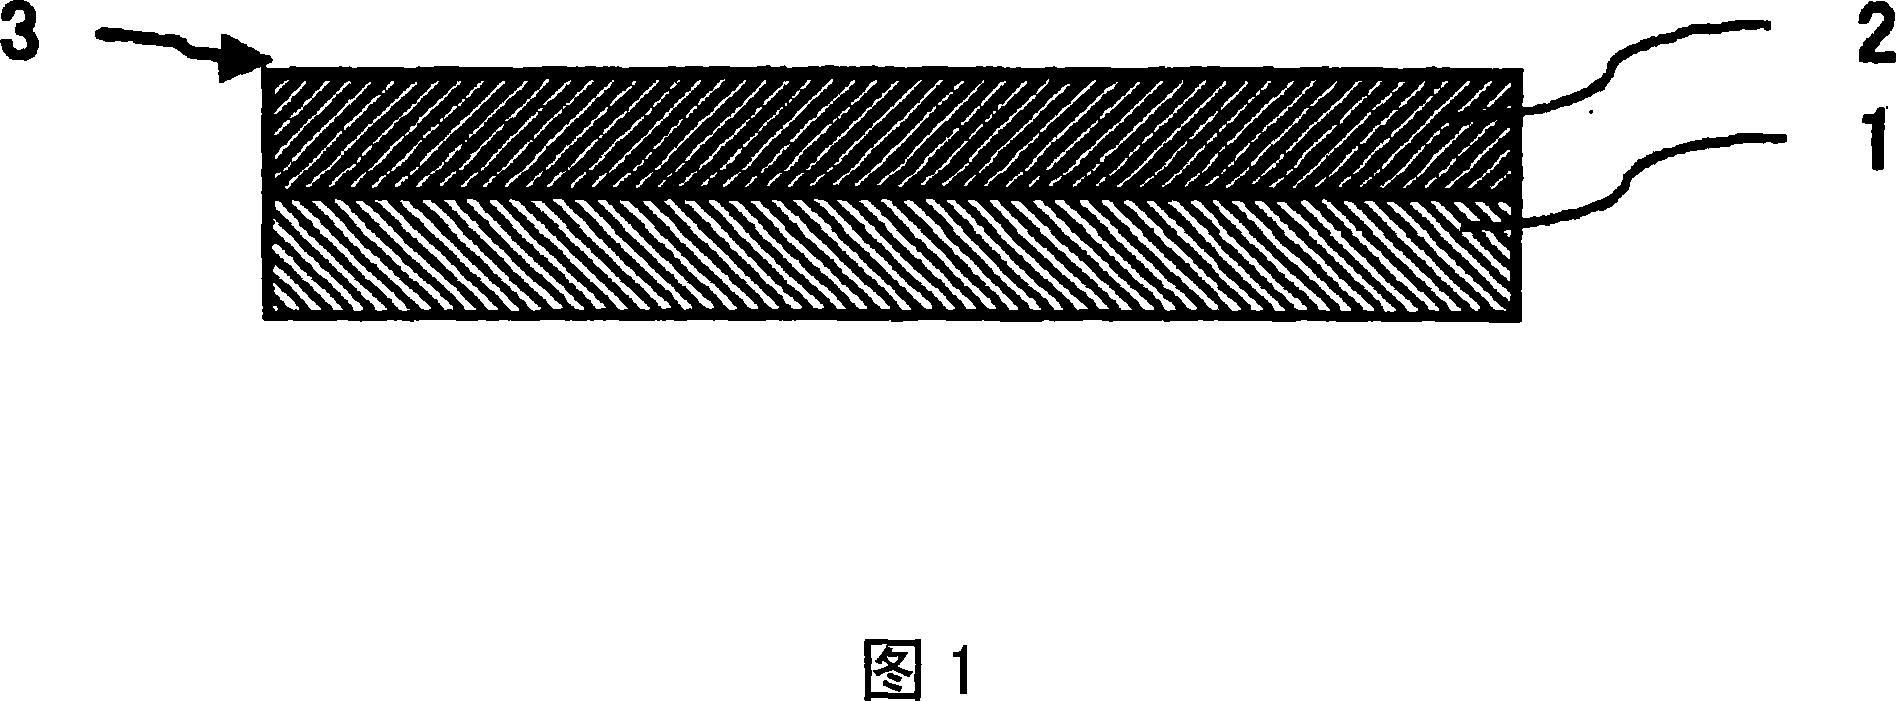 Hard-coated film, method of manufacturing the same, optical device, and image display